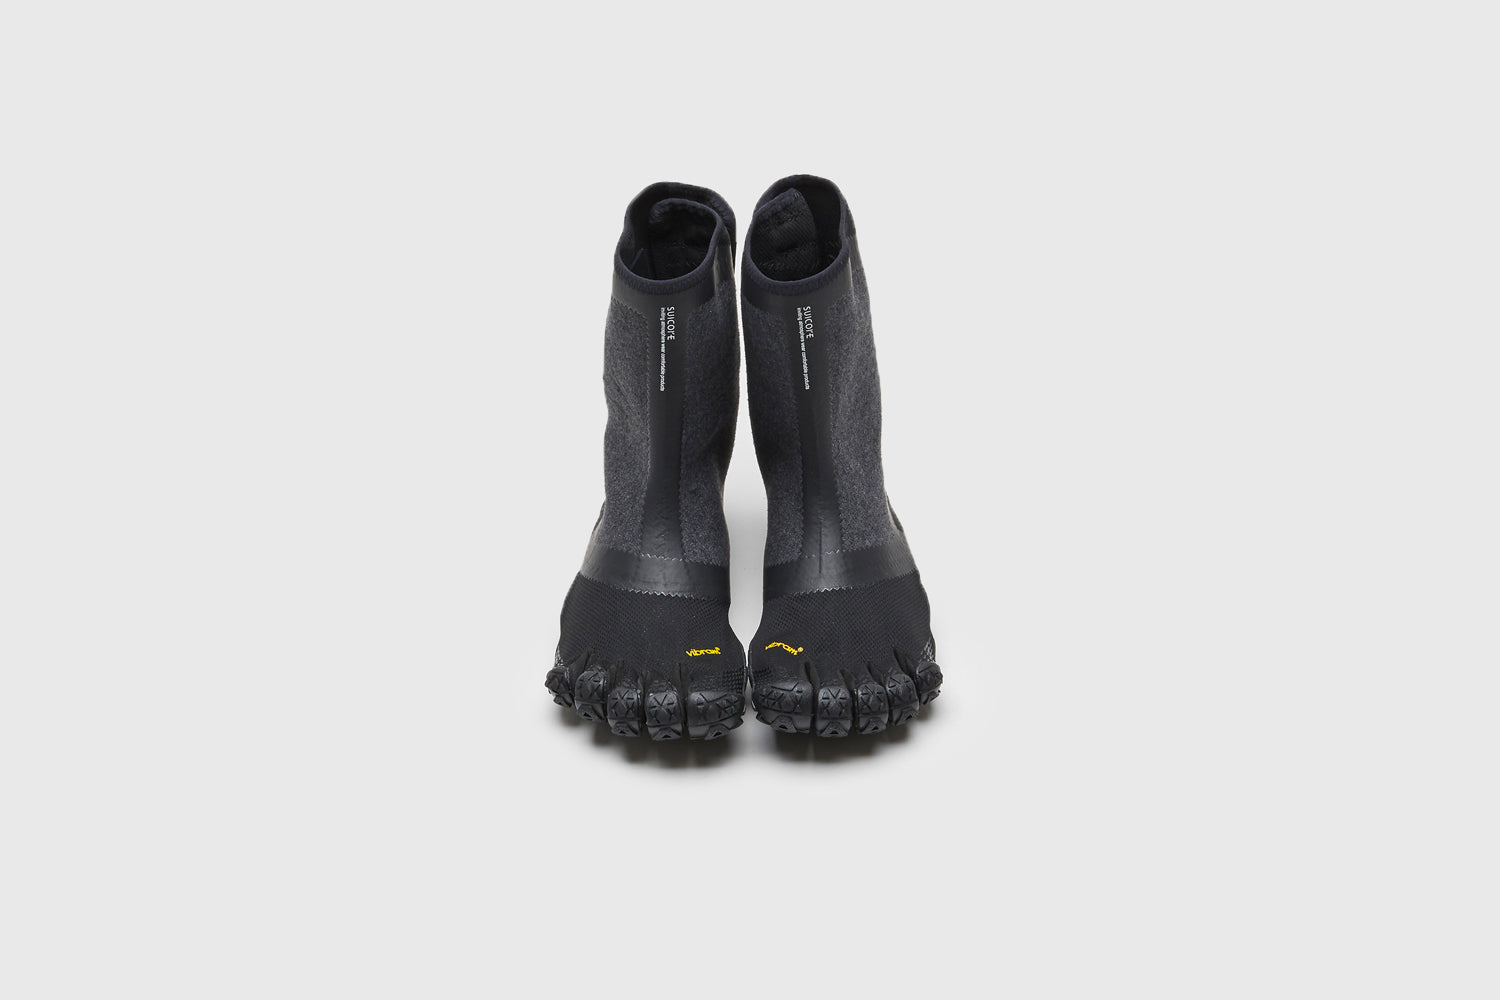 SUICOKE NIN-HI shoes with black nylon upper, black midsole and sole, strap and logo patch. From Spring/Summer 2023 collection on eightywingold Web Store, an official partner of SUICOKE. S20MHC BLACK